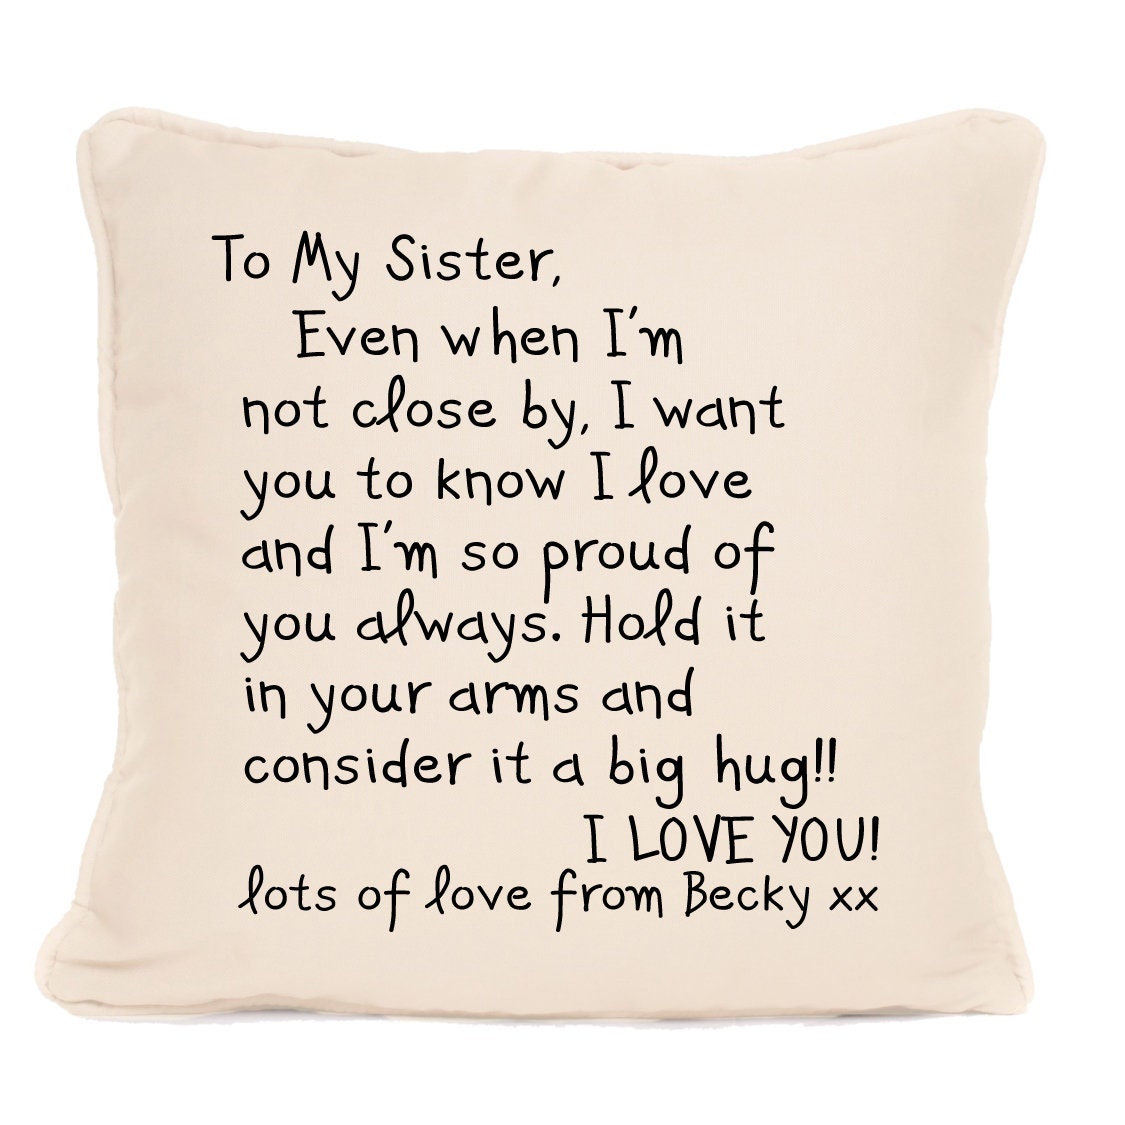  KHLOY to My Sister Pillowcase Gift,Funny Sisters